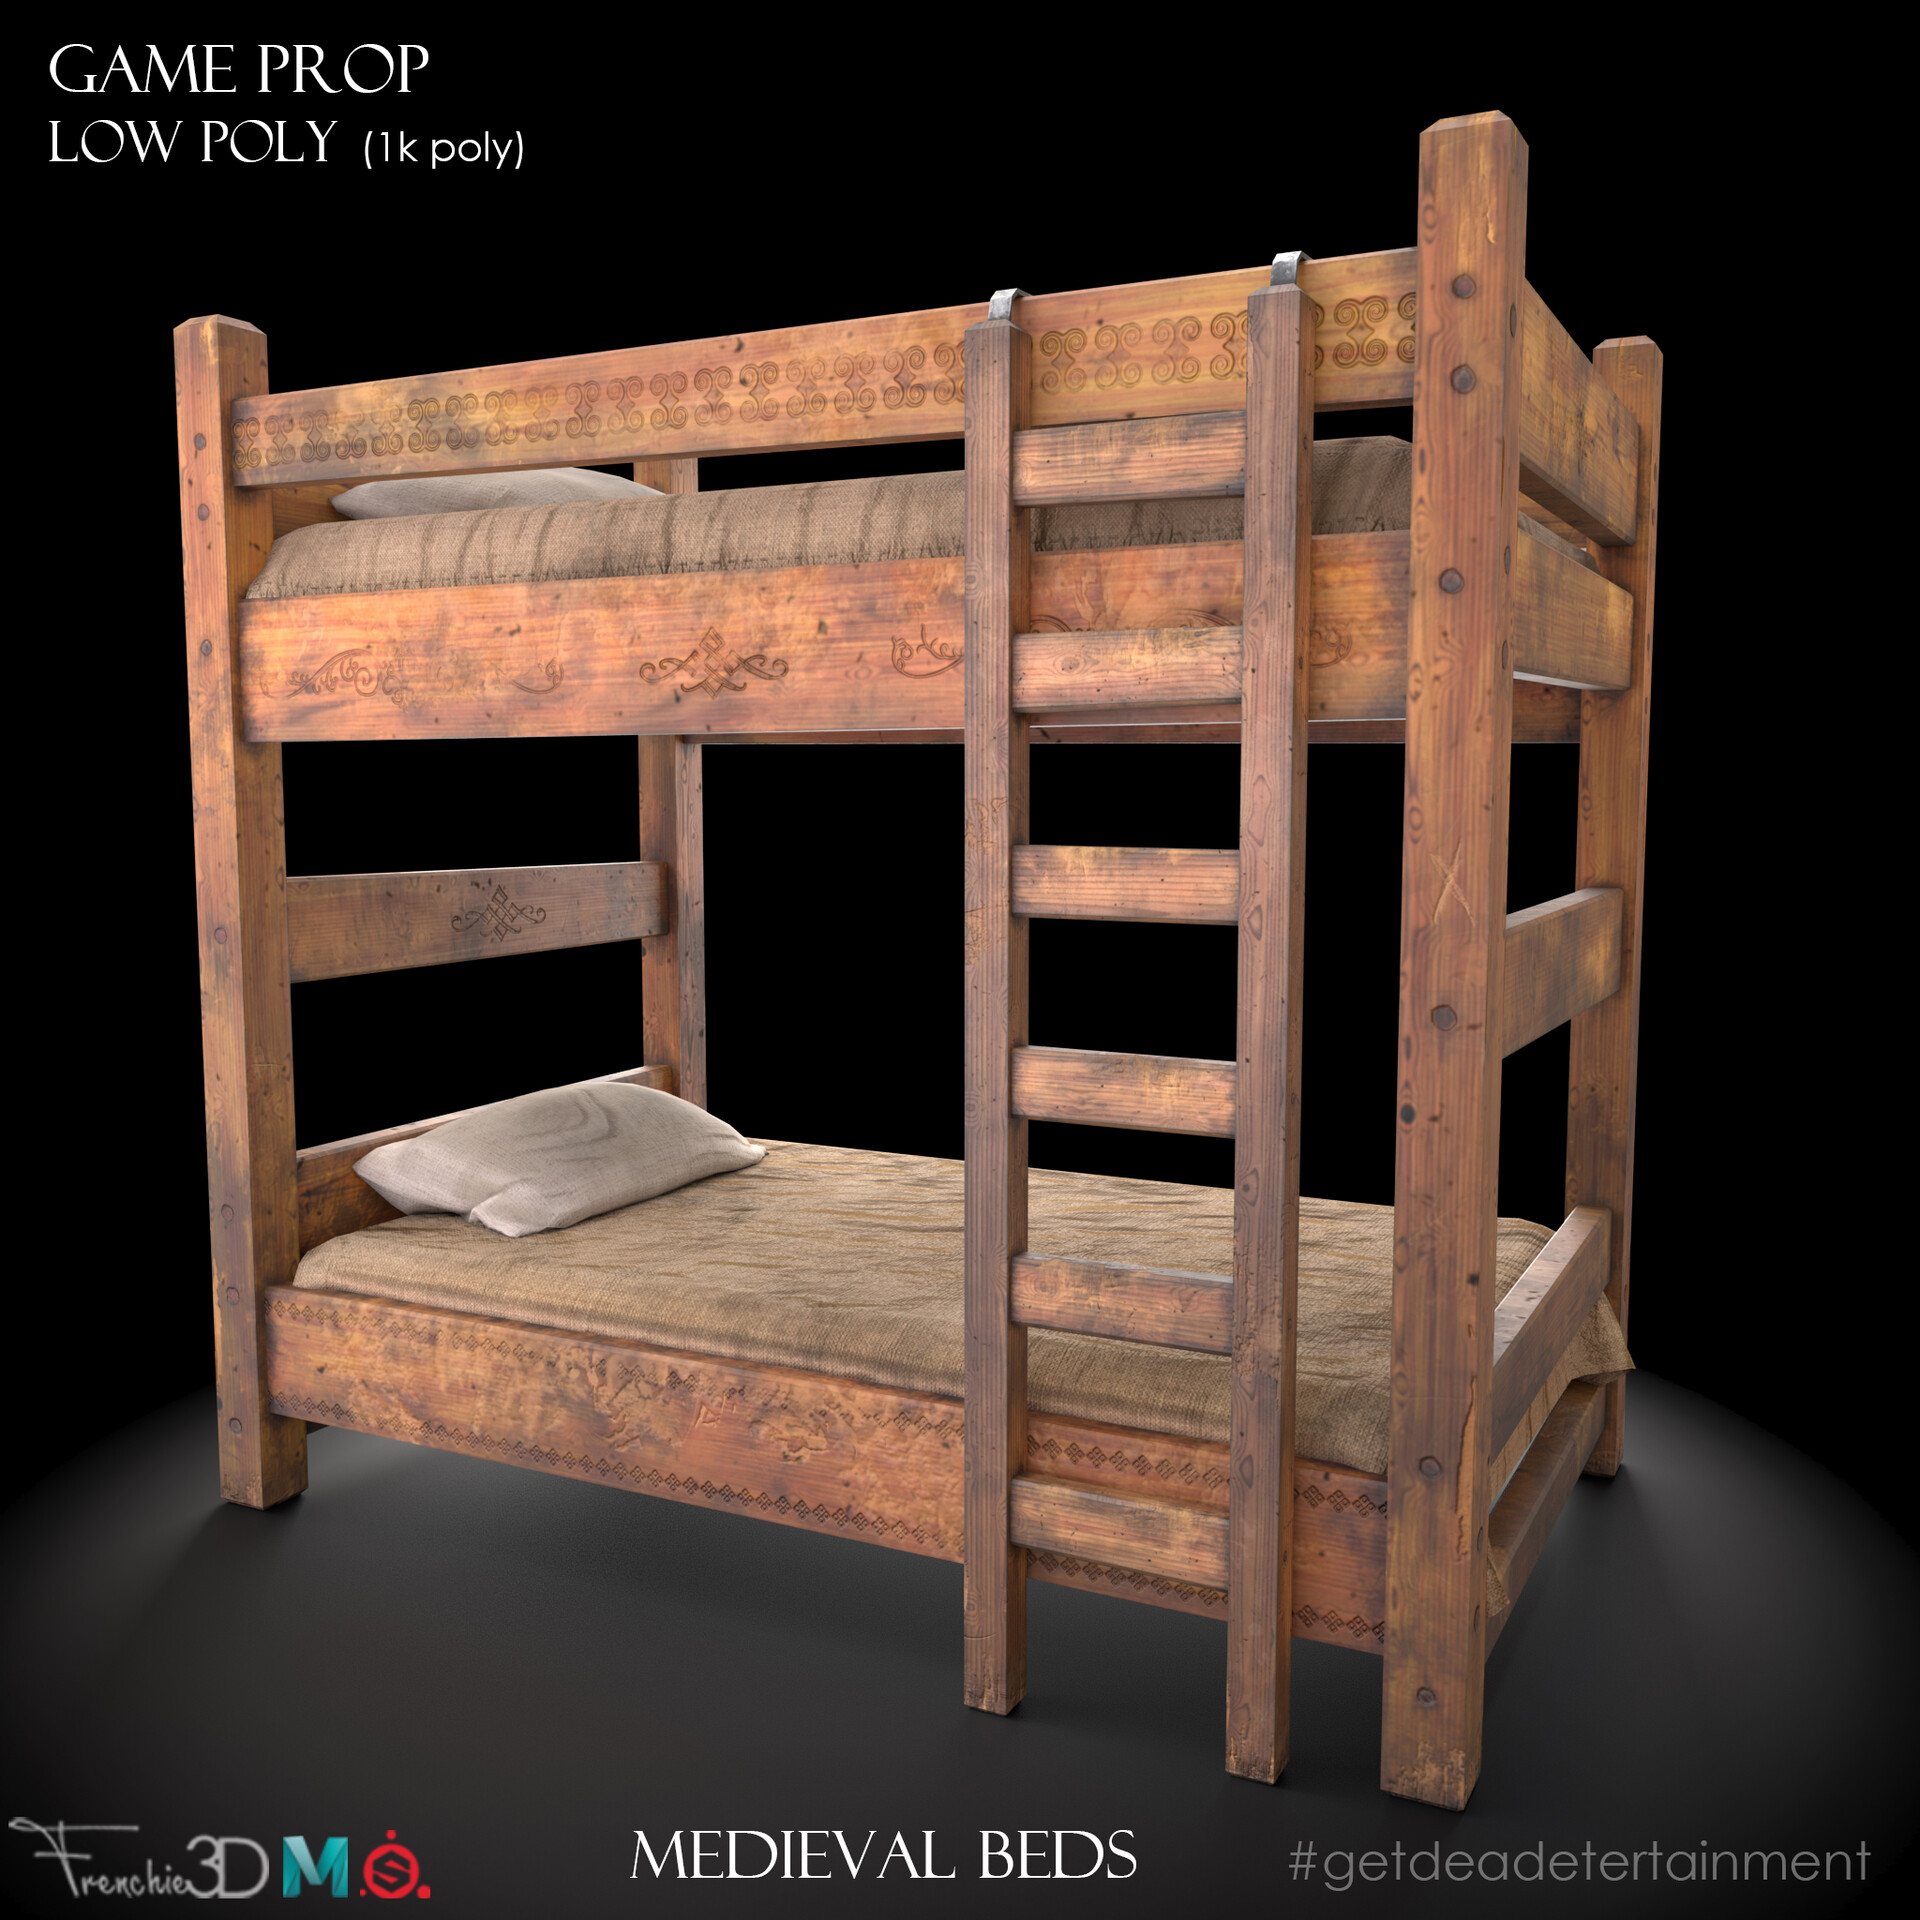 Bunk Beds Low Poly Game Asset, Old Fashioned Bunk Beds